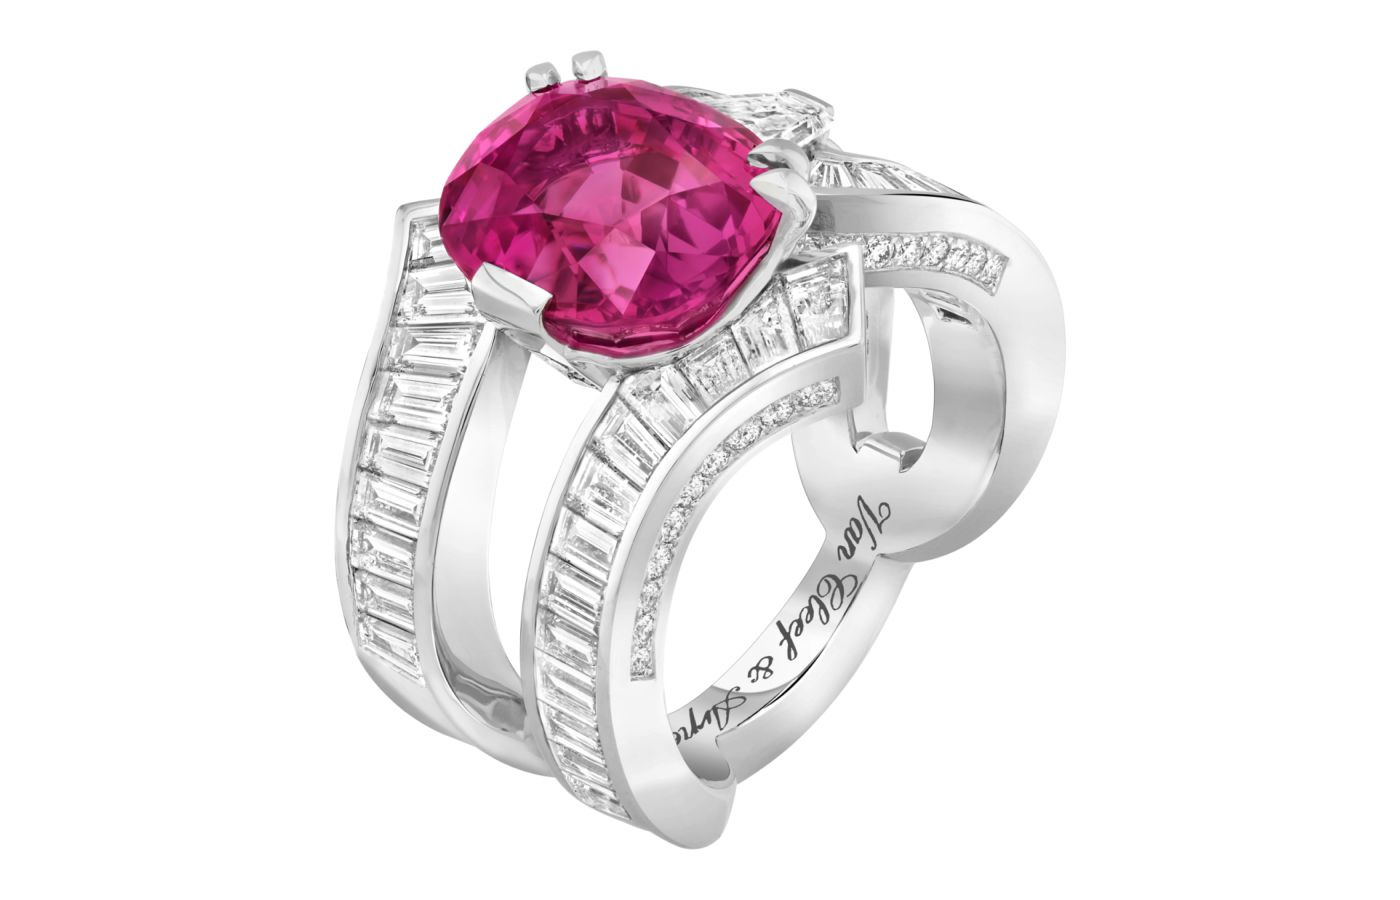 Van Cleef & Arpels Noeud Royal ring in white gold, featuring a 6.38-ct cushion-cut pink sapphire and diamonds from Le Grand Tour High Jewellery collection 